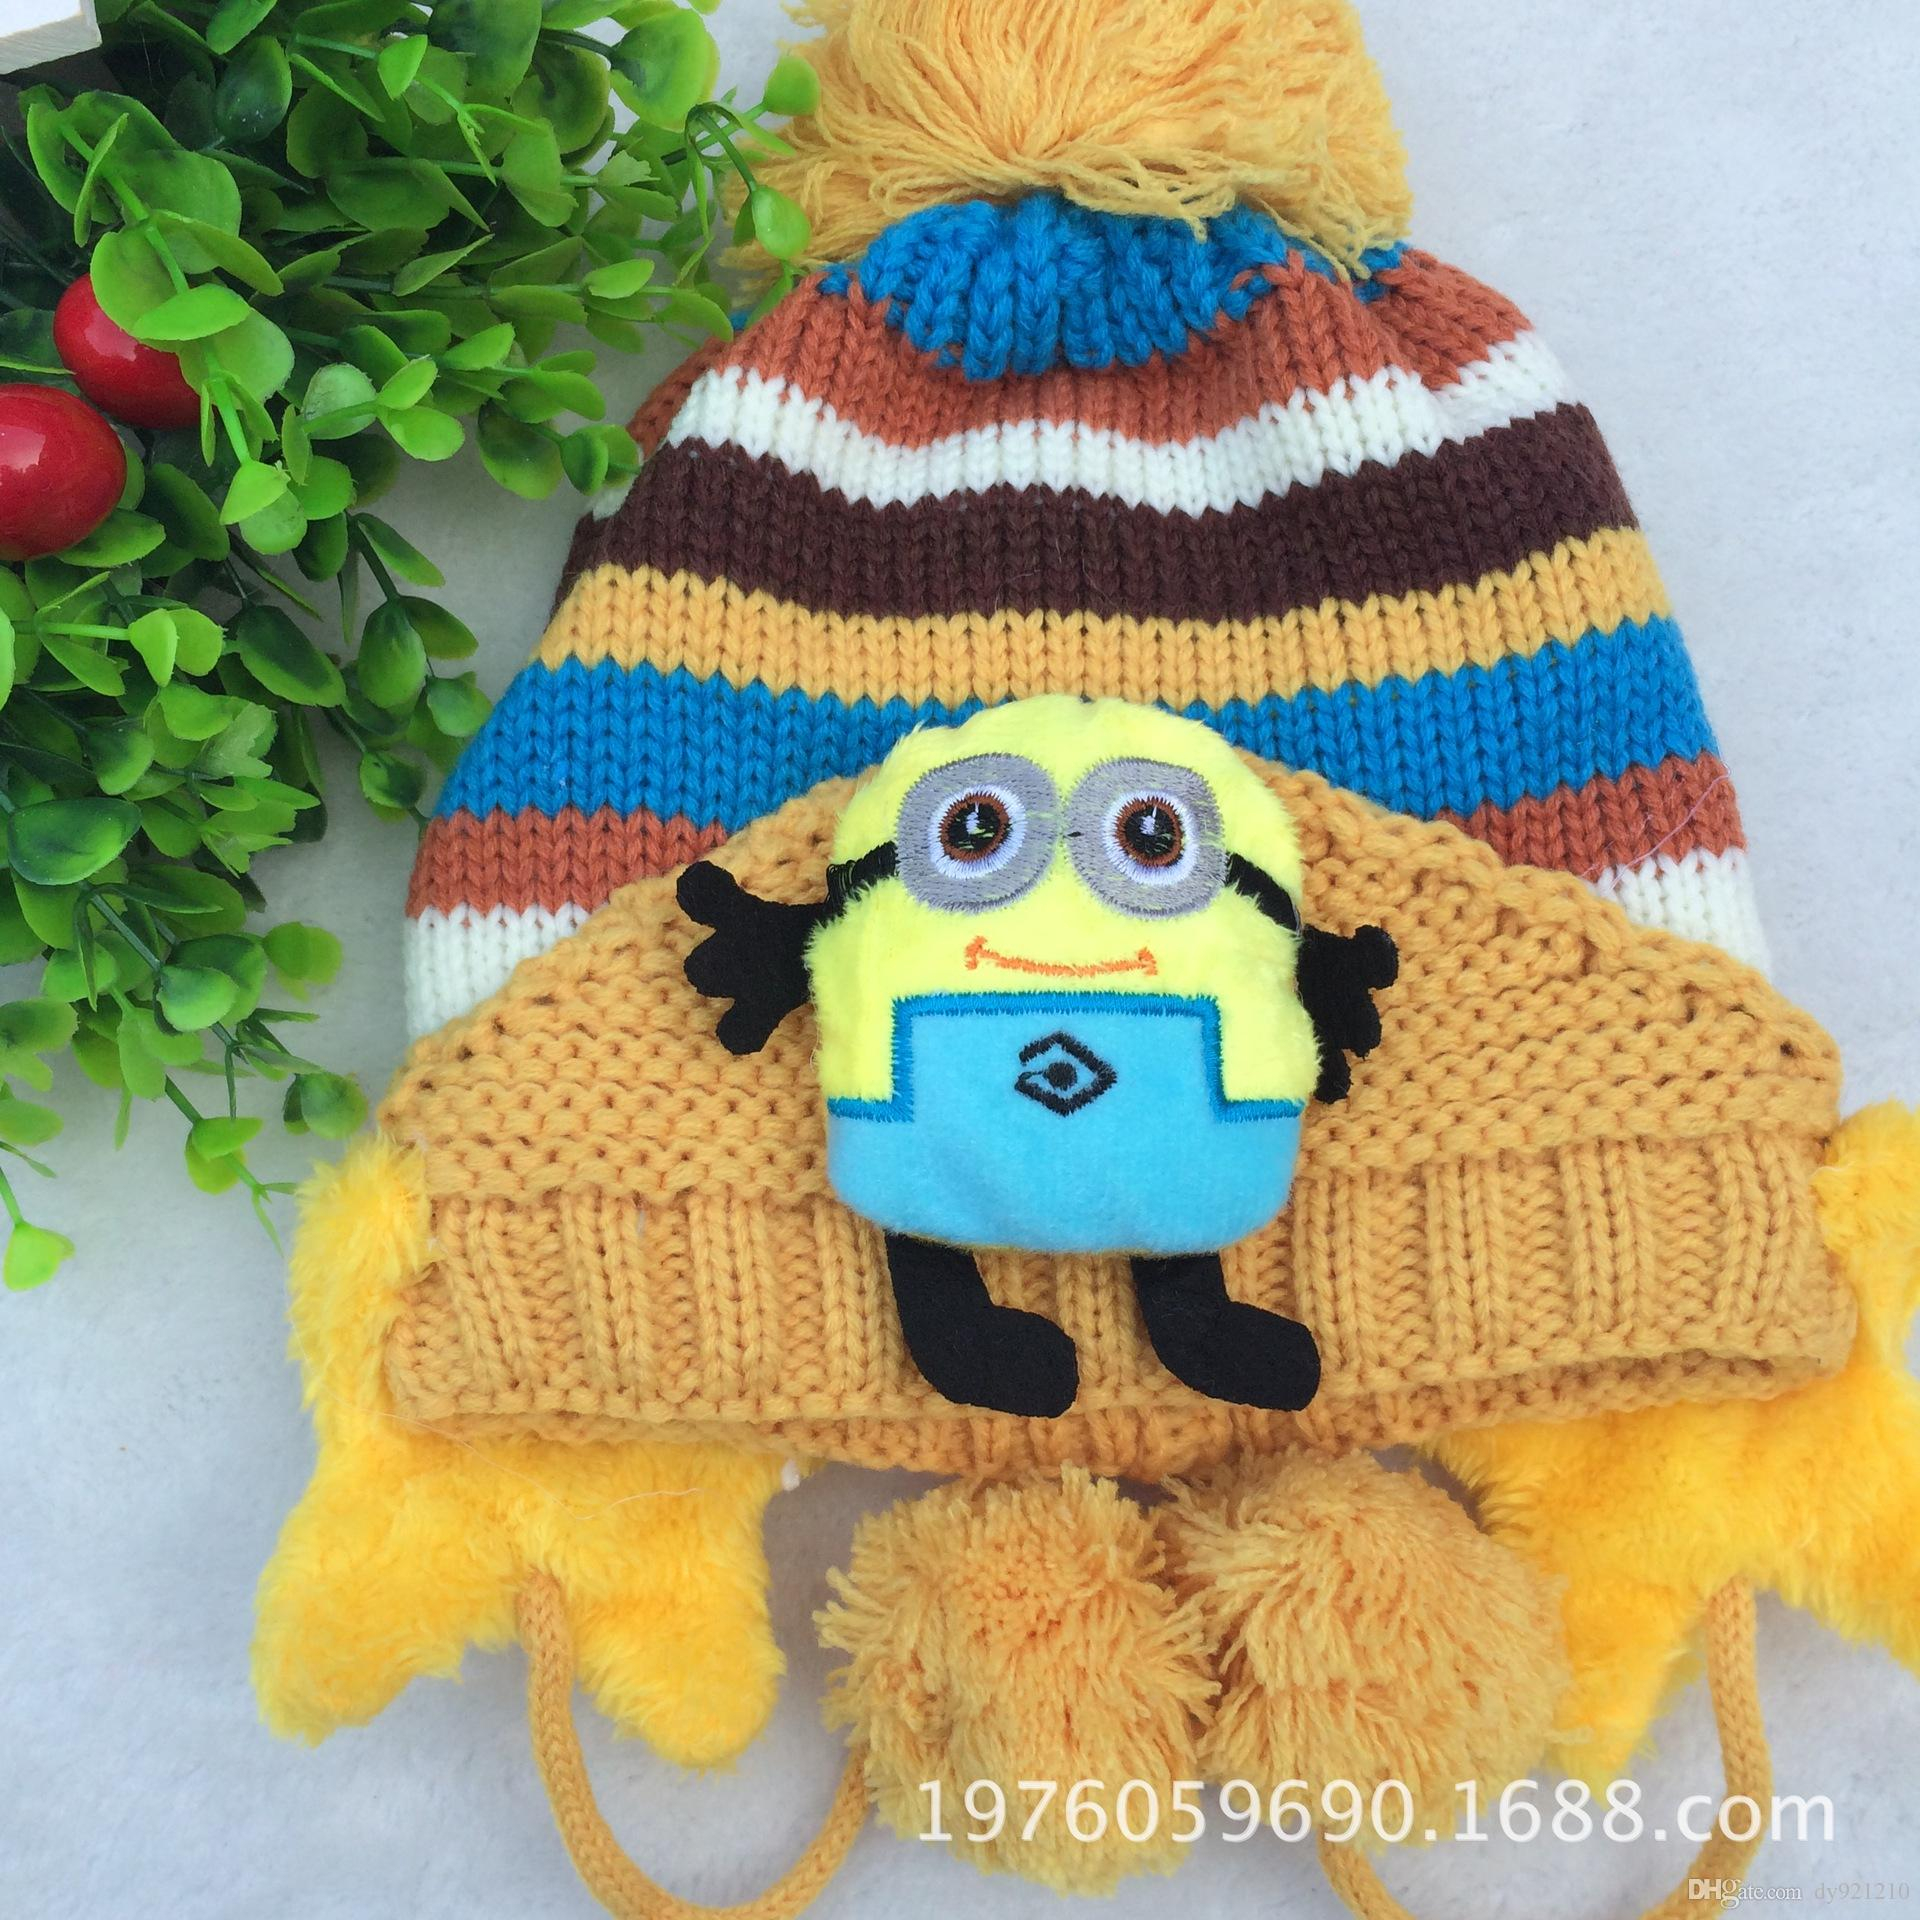 Crochet Minion Hat Pattern 2019 2014 New Minion Hat Crochet Pattern Despicable Me Hat With